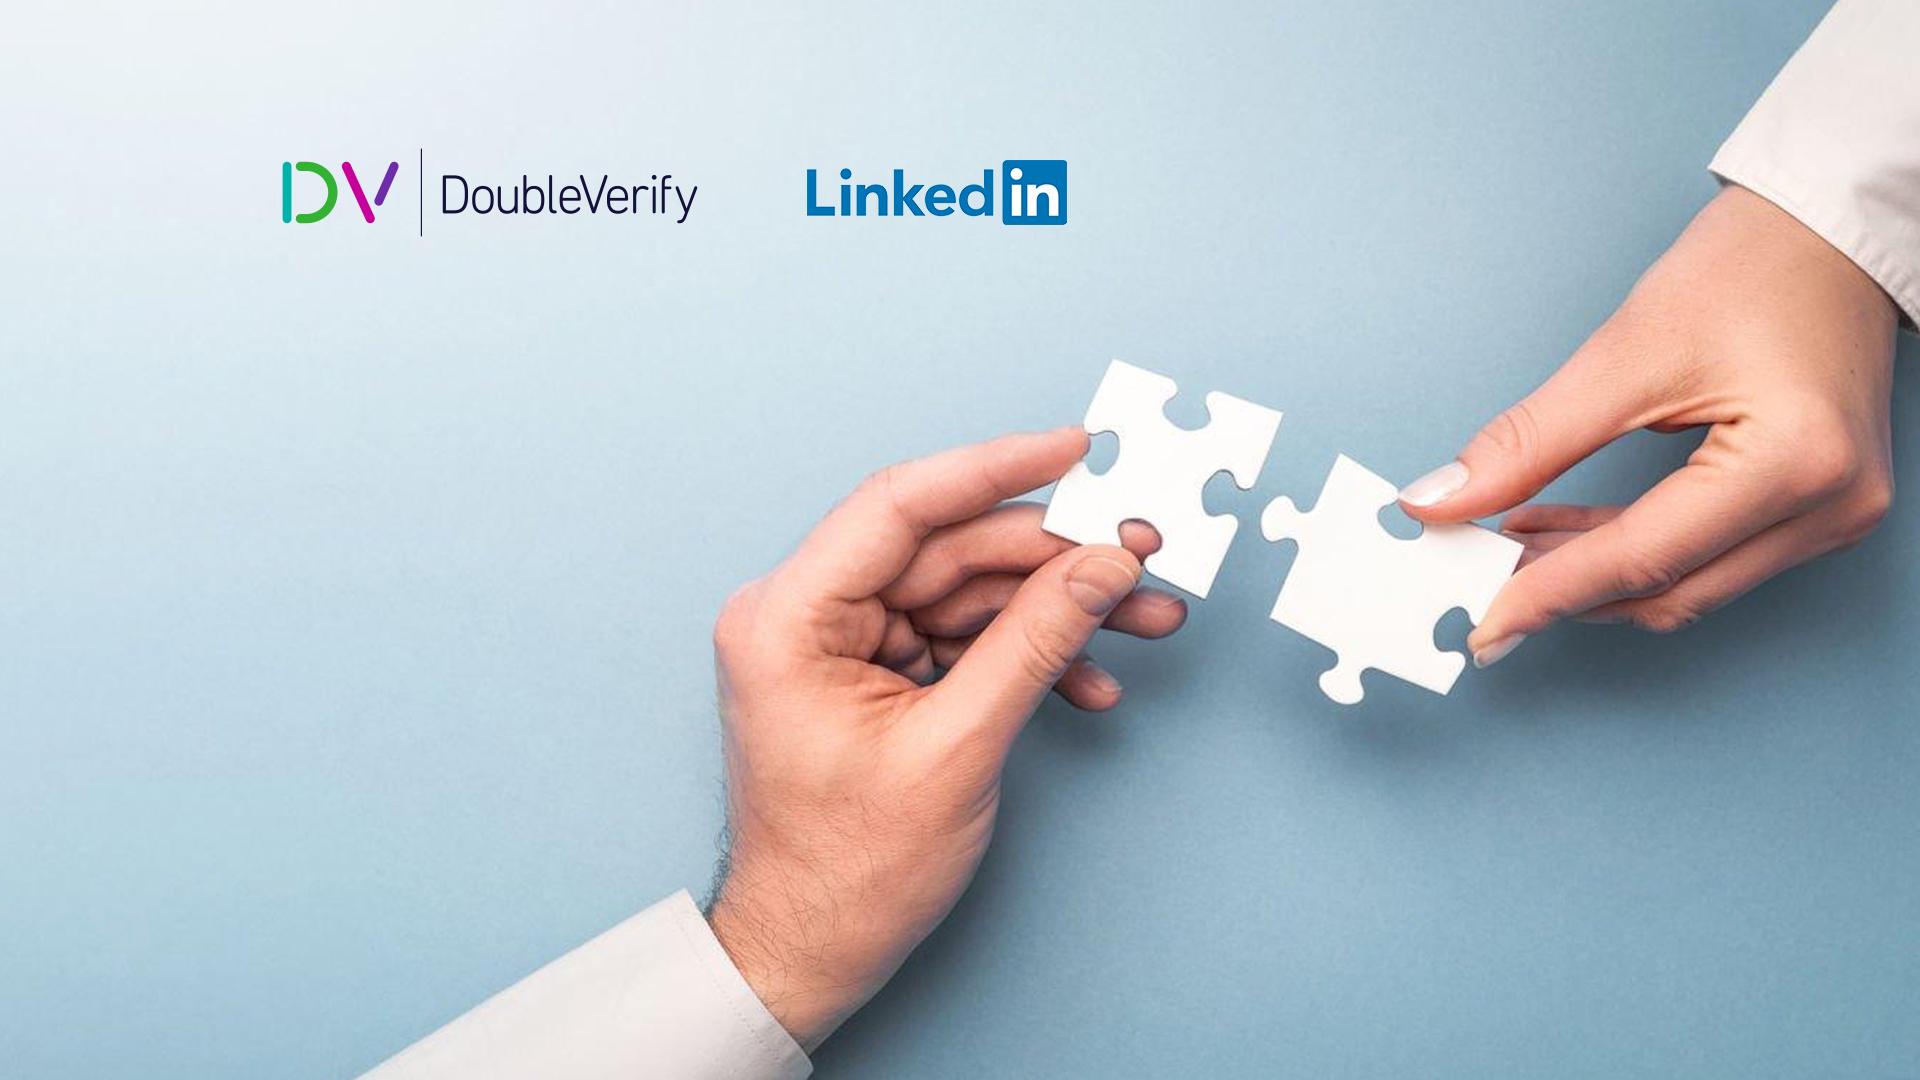 DoubleVerify expands collaboration with LinkedIn to reinforce brand safety protections and contextual alignment